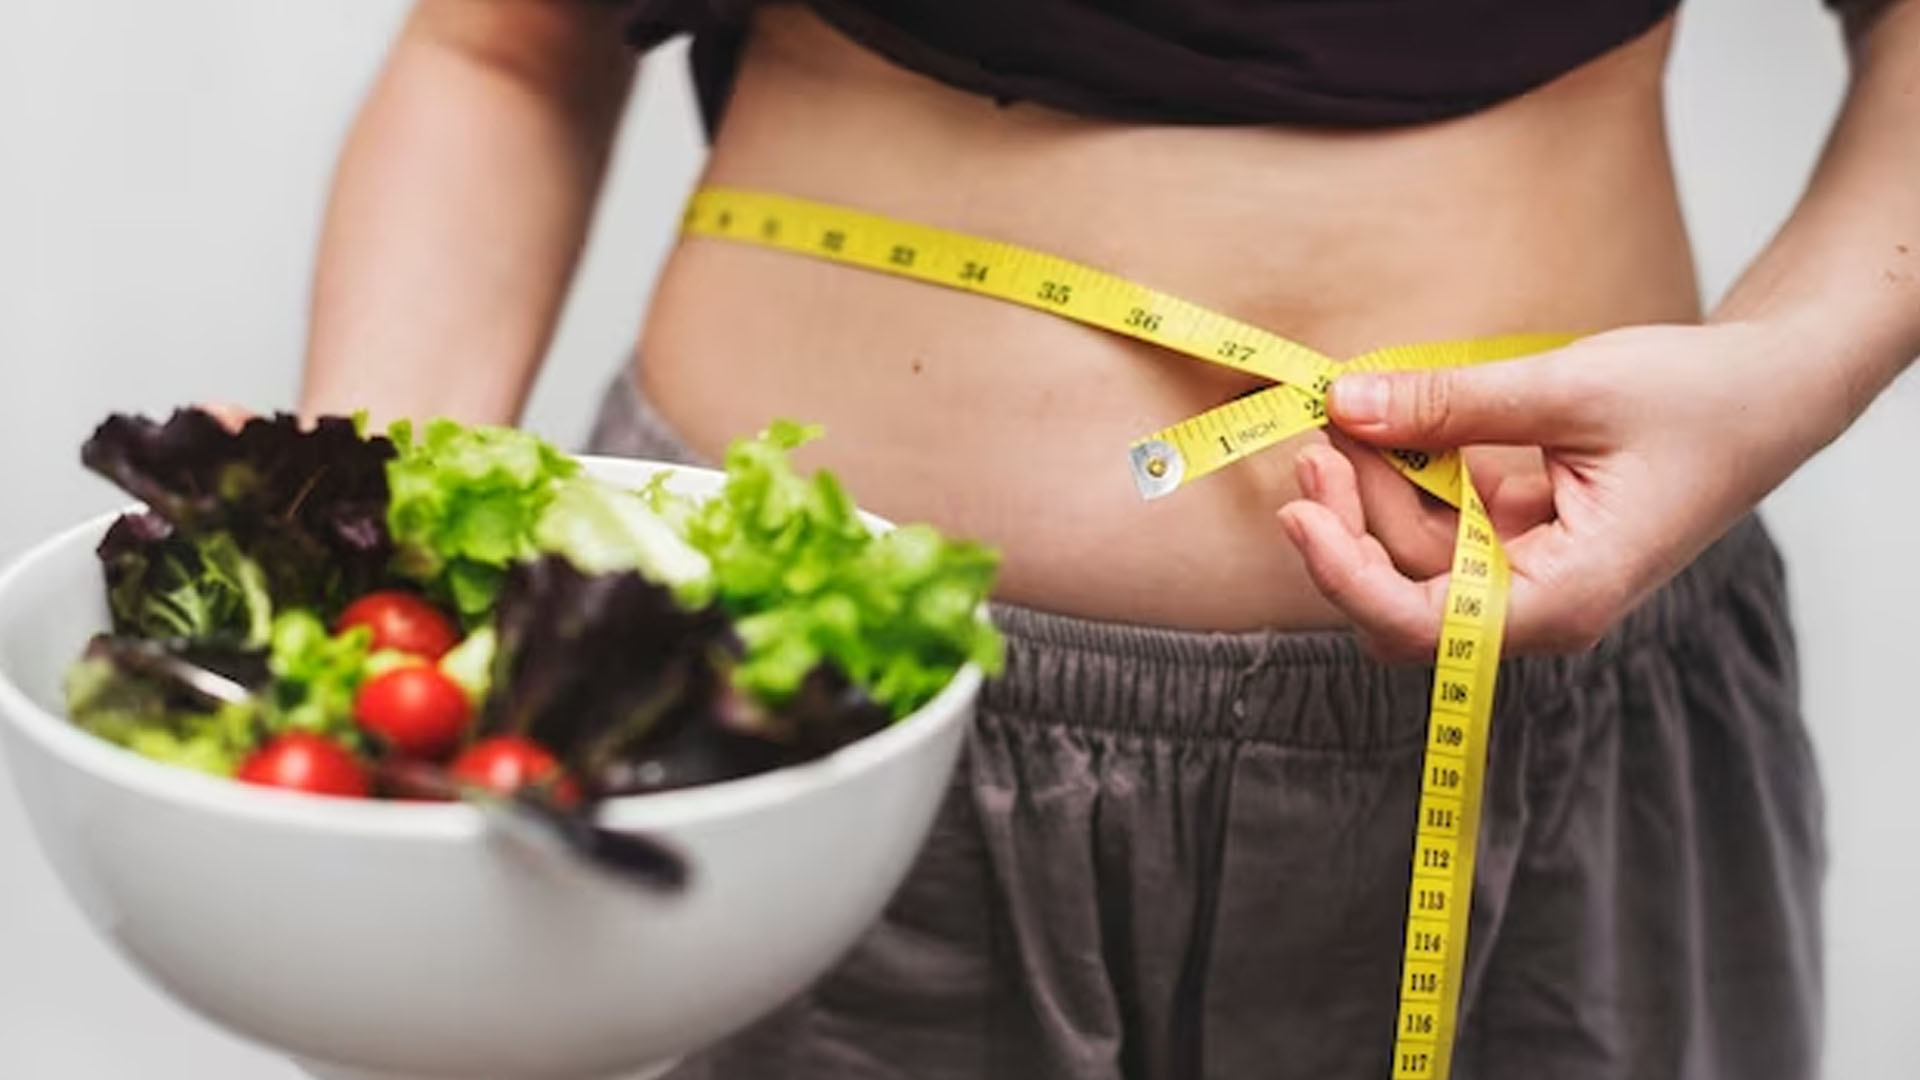 What are the Home Remedies to weight loss?